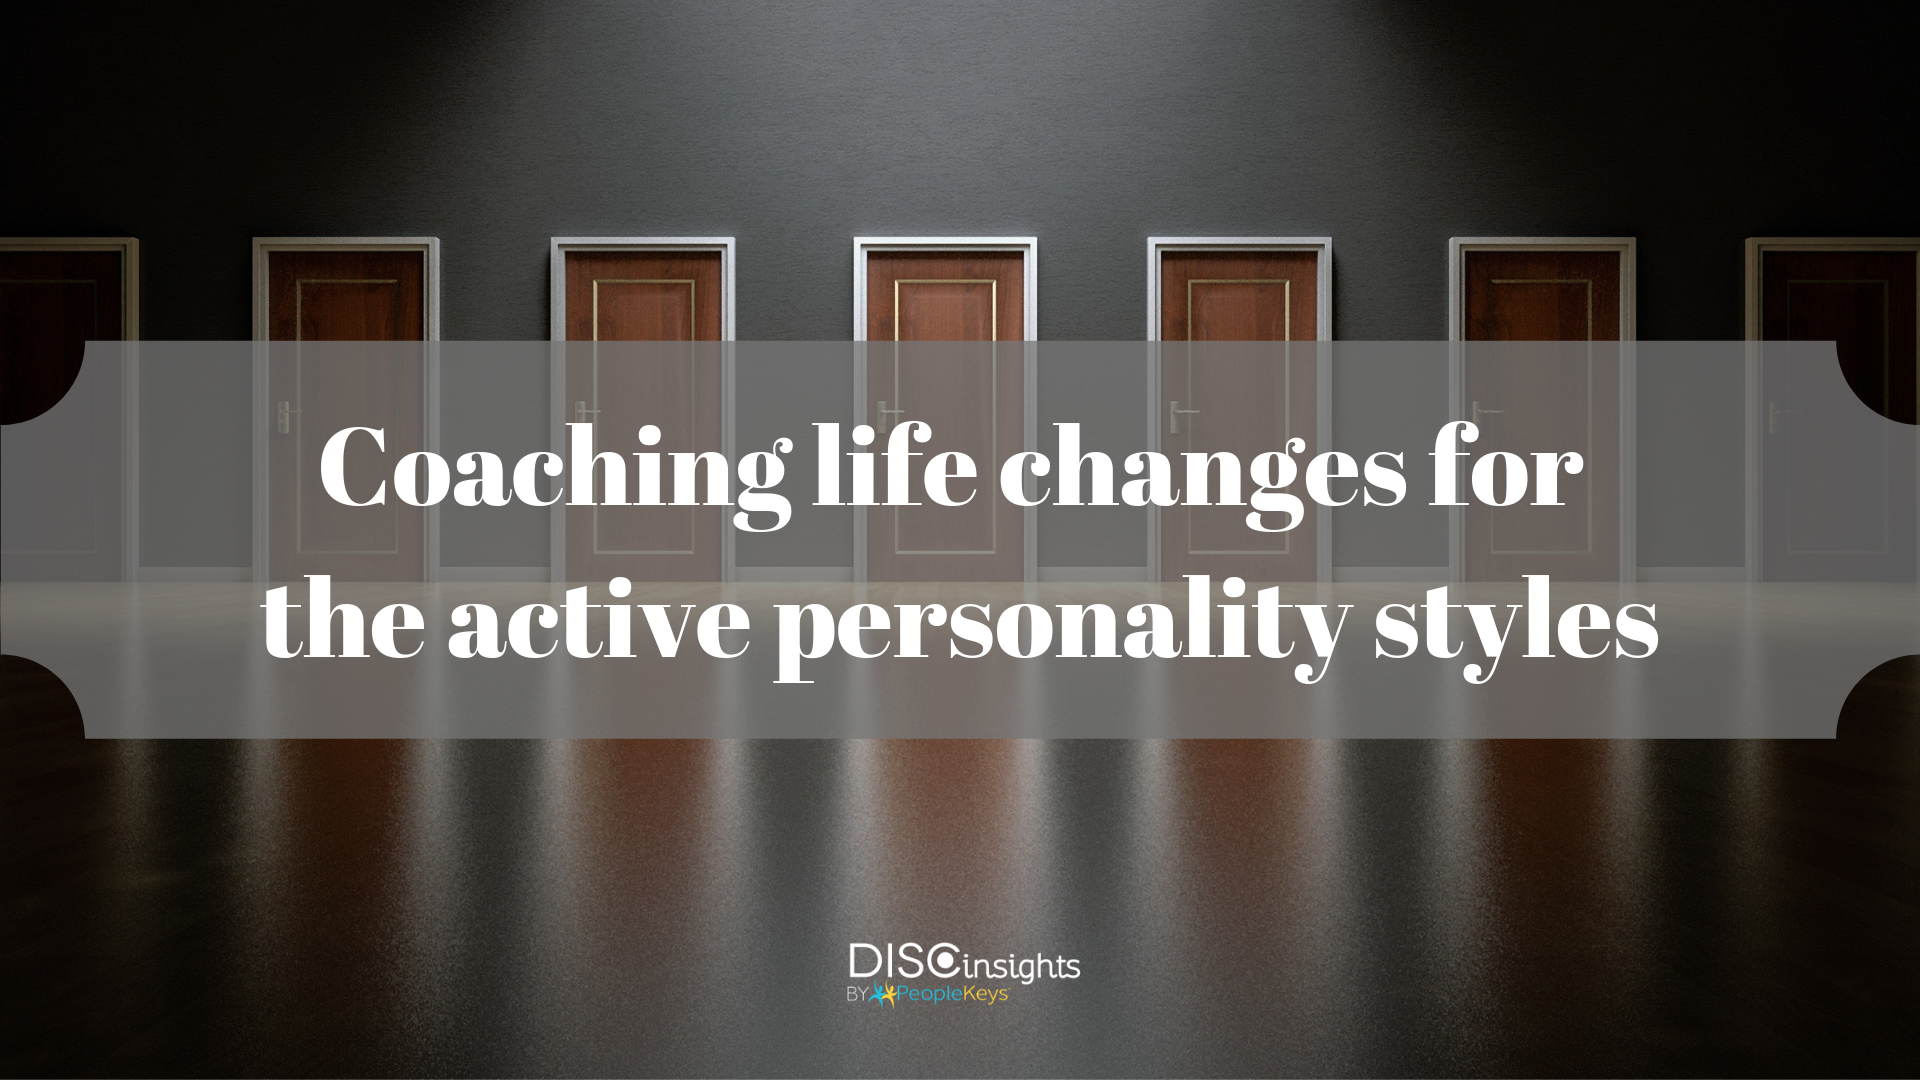 Coaching life changes for the active personality styles (1)